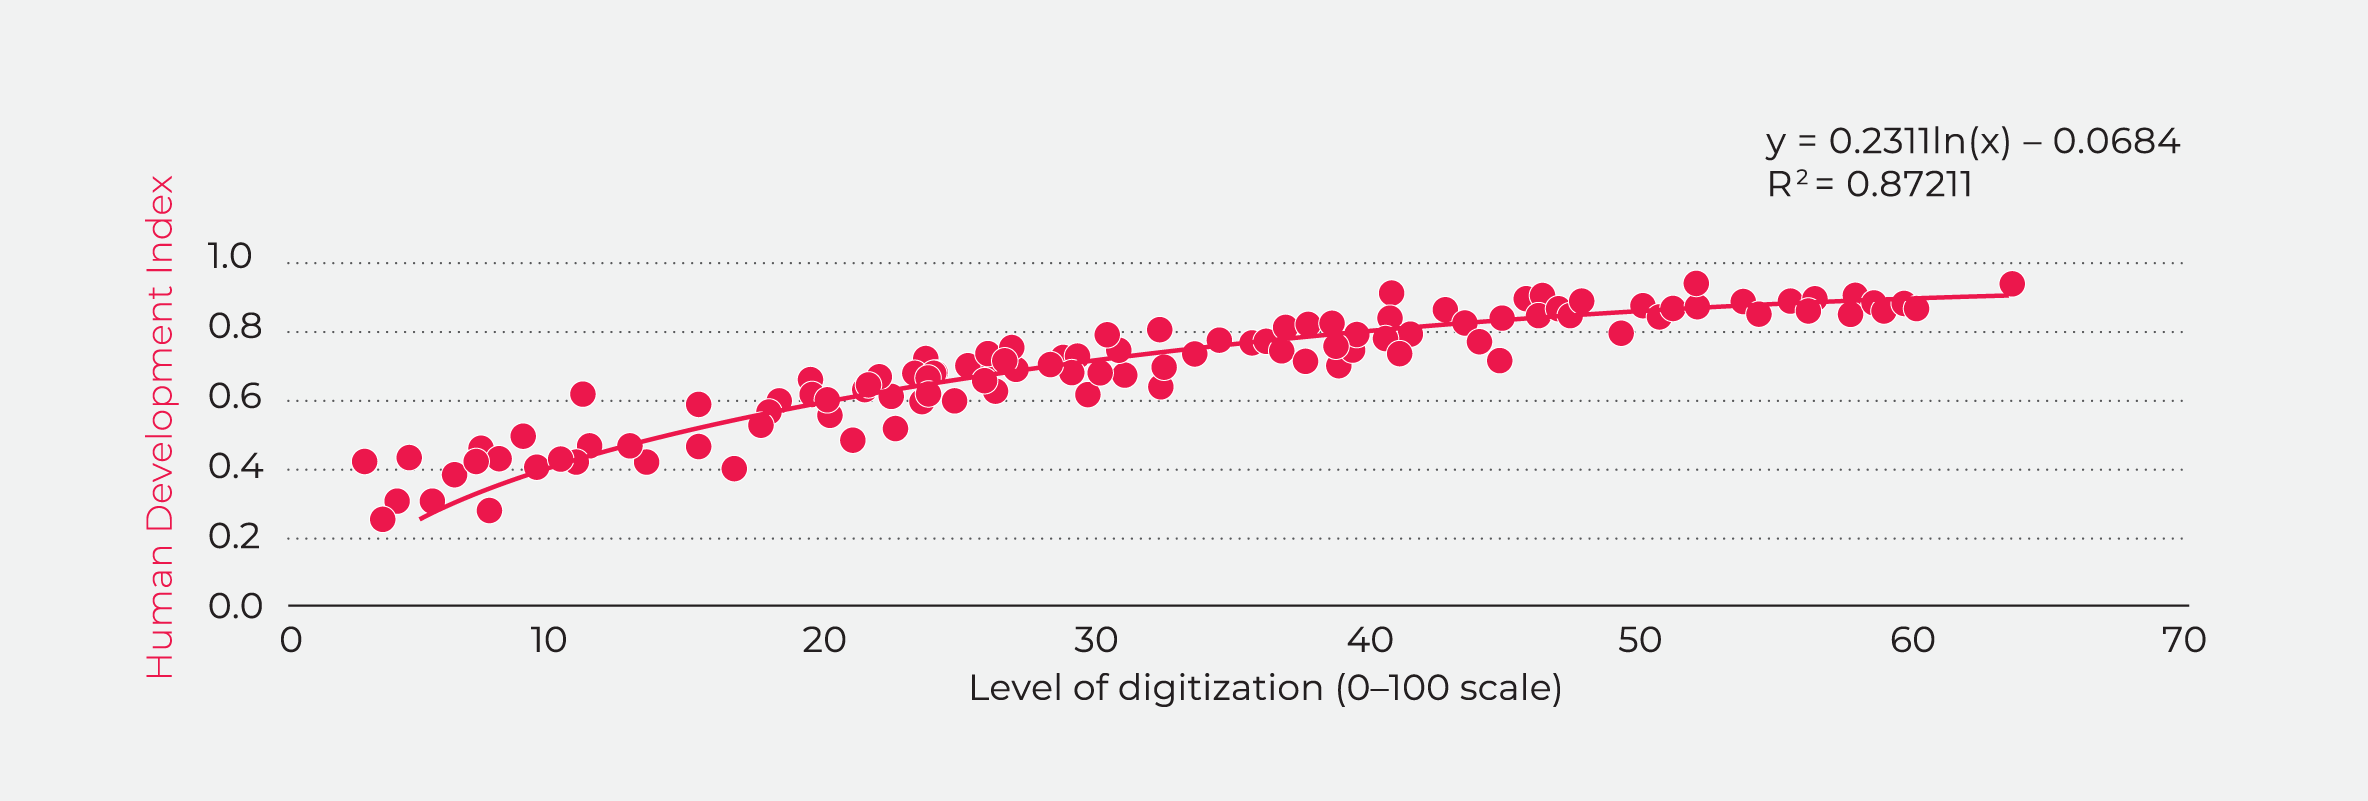 Digitization and the Wellbeing Thriving Index (67 non-OECD countries)